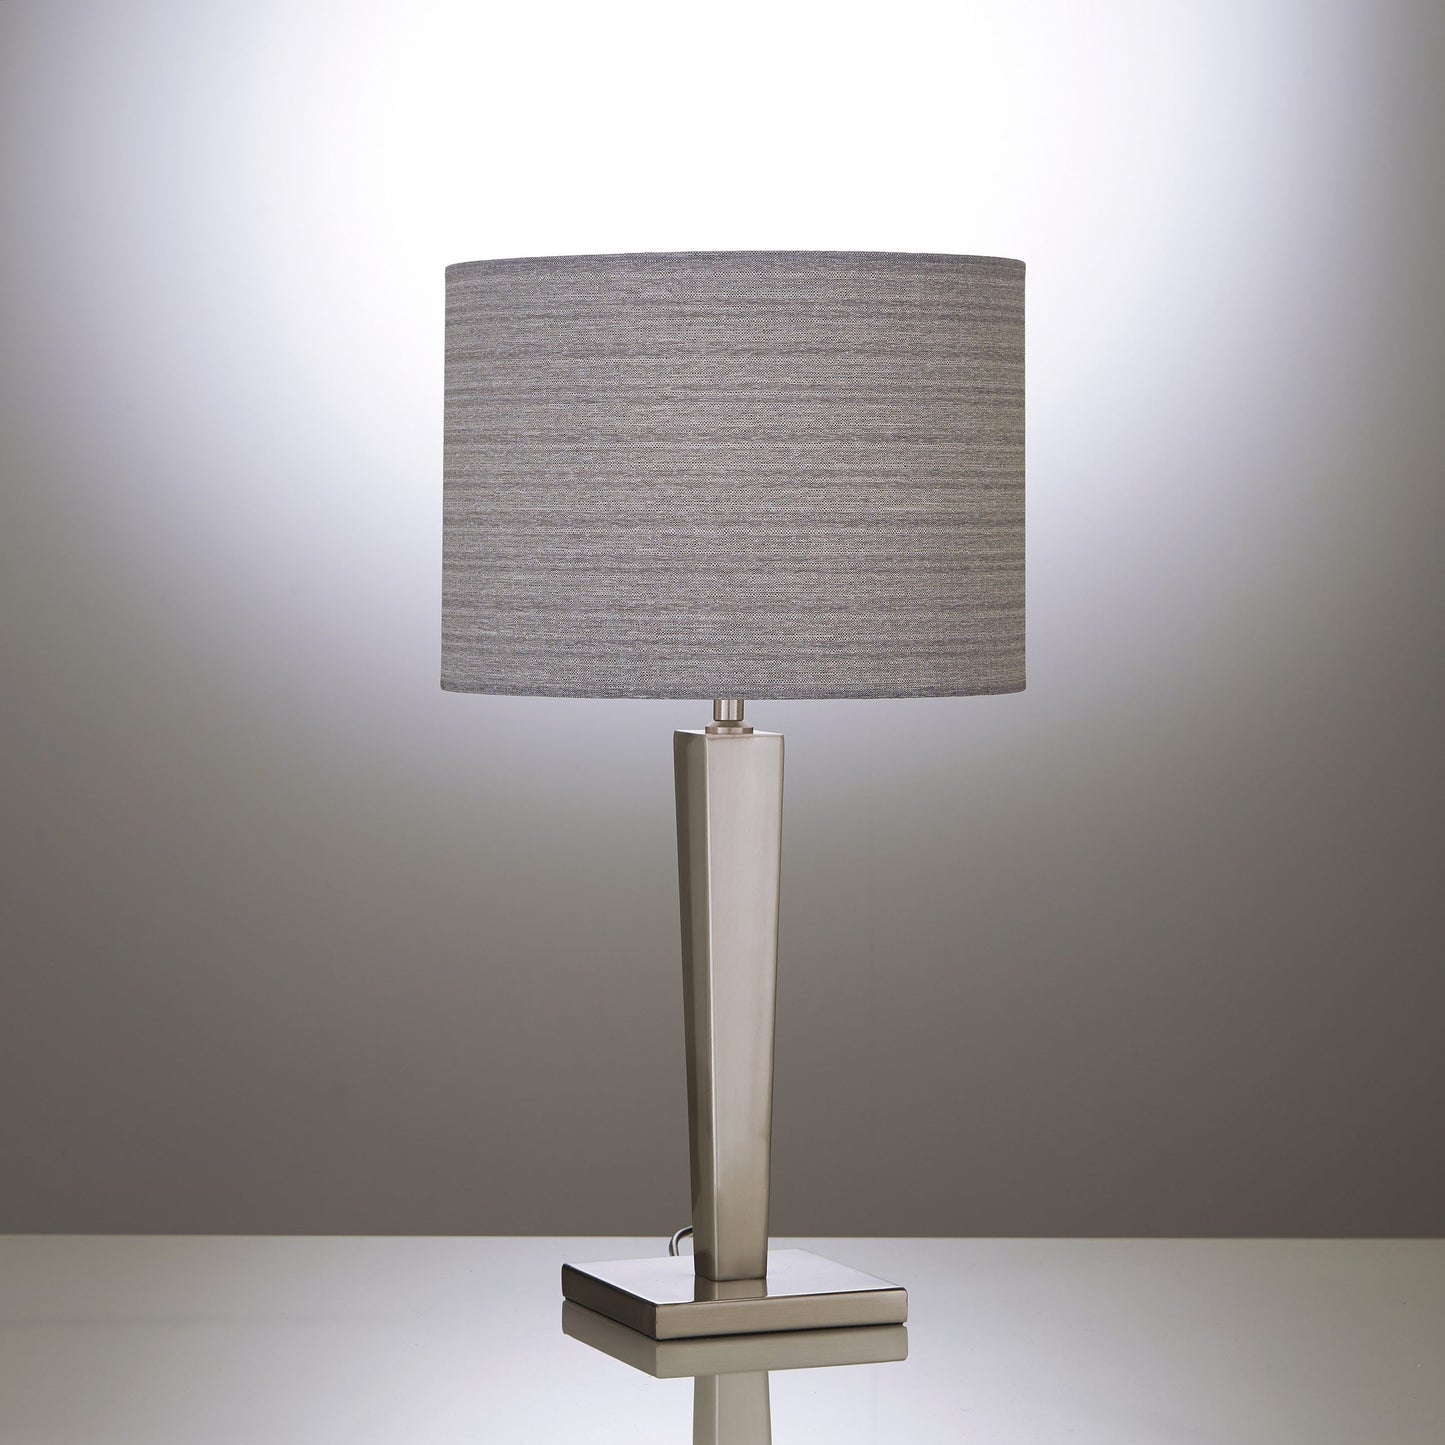 Table Lamp with Satin Nickel Metal and a Grey Linen Fabric Lamp Shade